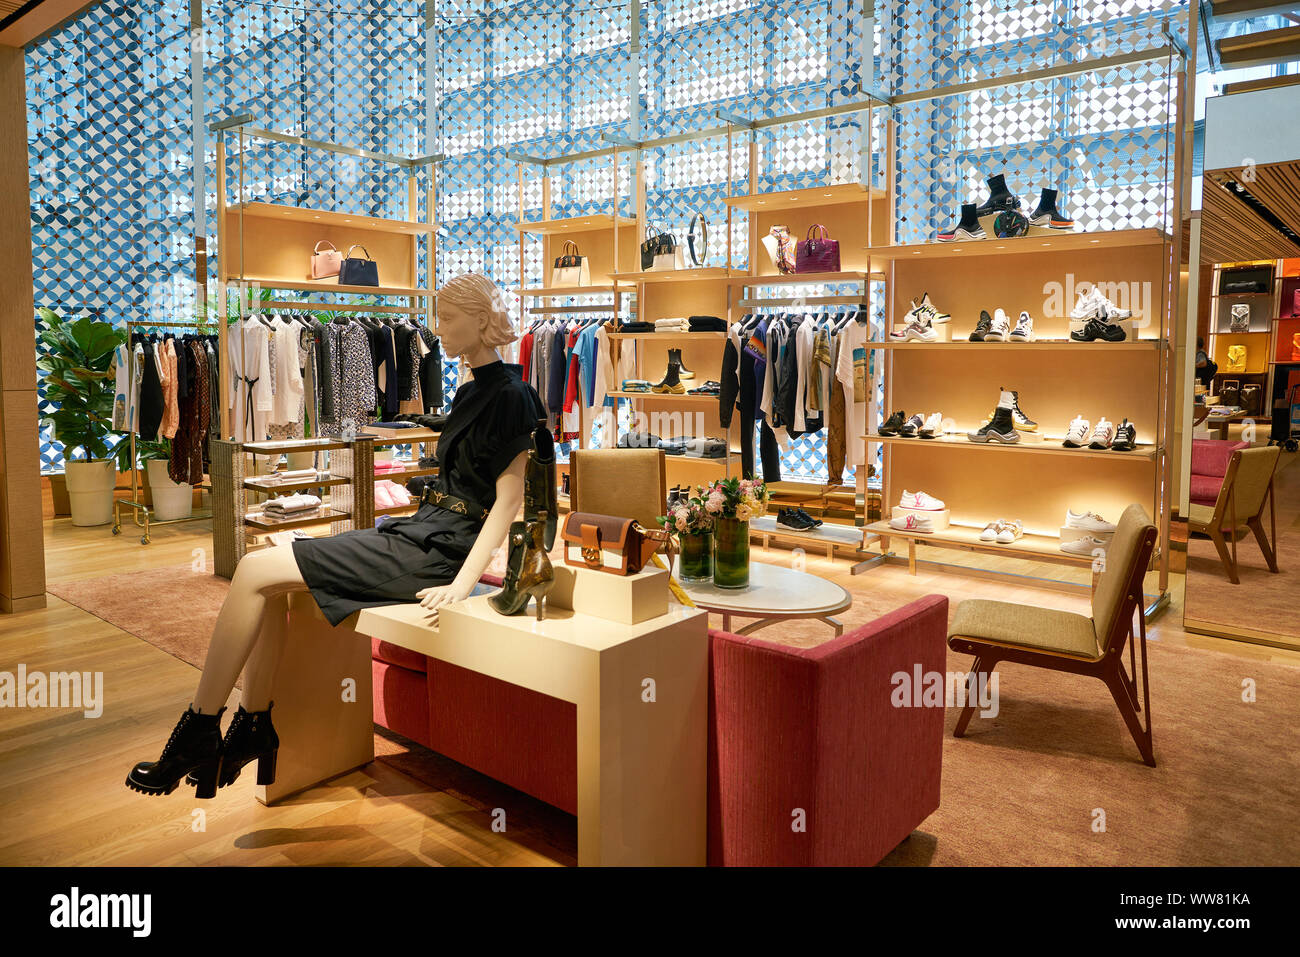 SINGAPORE - MAR 3, 2020: Interior Of Louis Vuitton Fashion House At Marina  Bay Sands Shopping Mall In Singapore Stock Photo, Picture and Royalty Free  Image. Image 142786105.